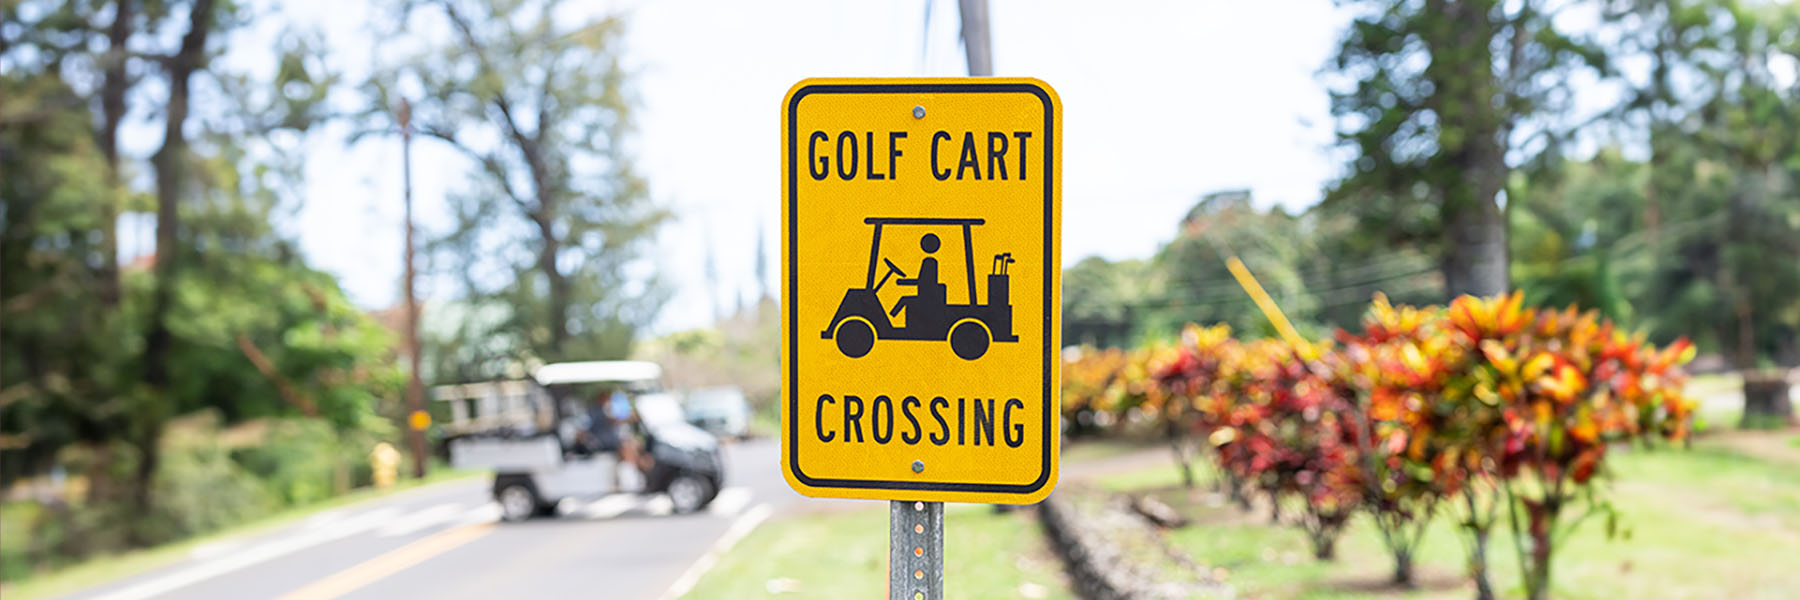 picture representing golf cart safety for kids